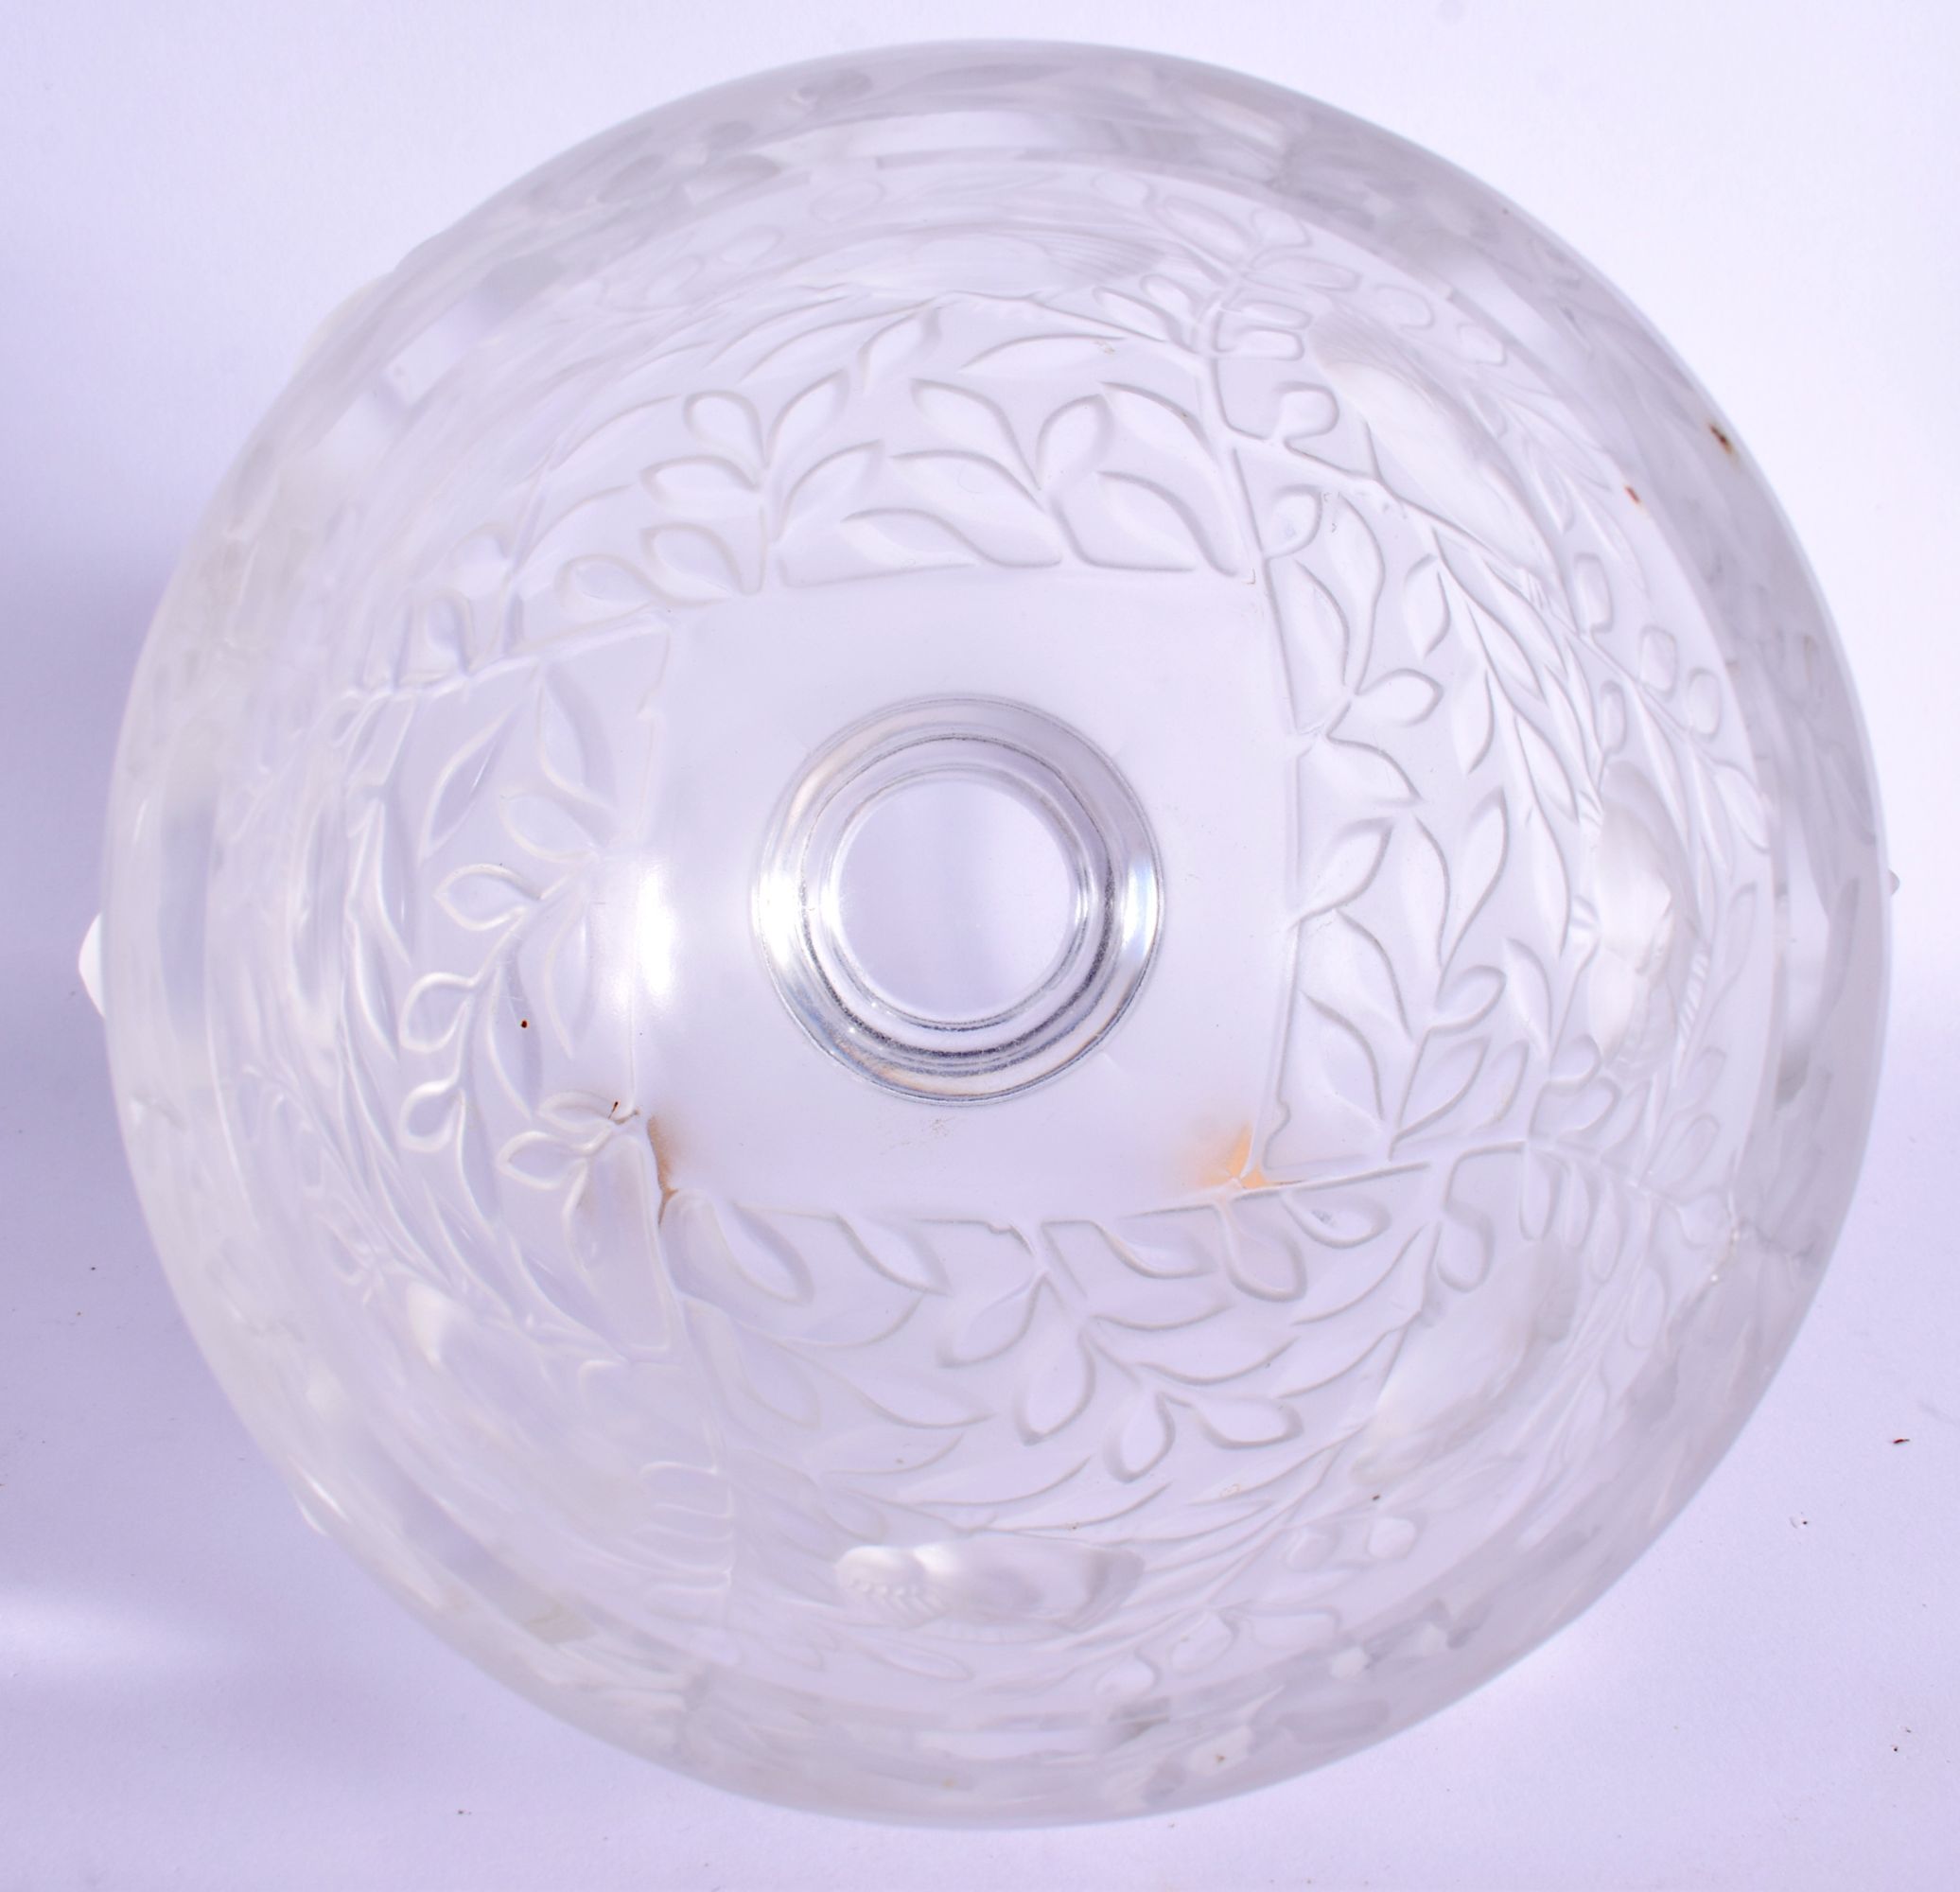 A FRENCH LALIQUE GLASS BIRD VASE. 14 cm x 10 cm. - Image 4 of 8